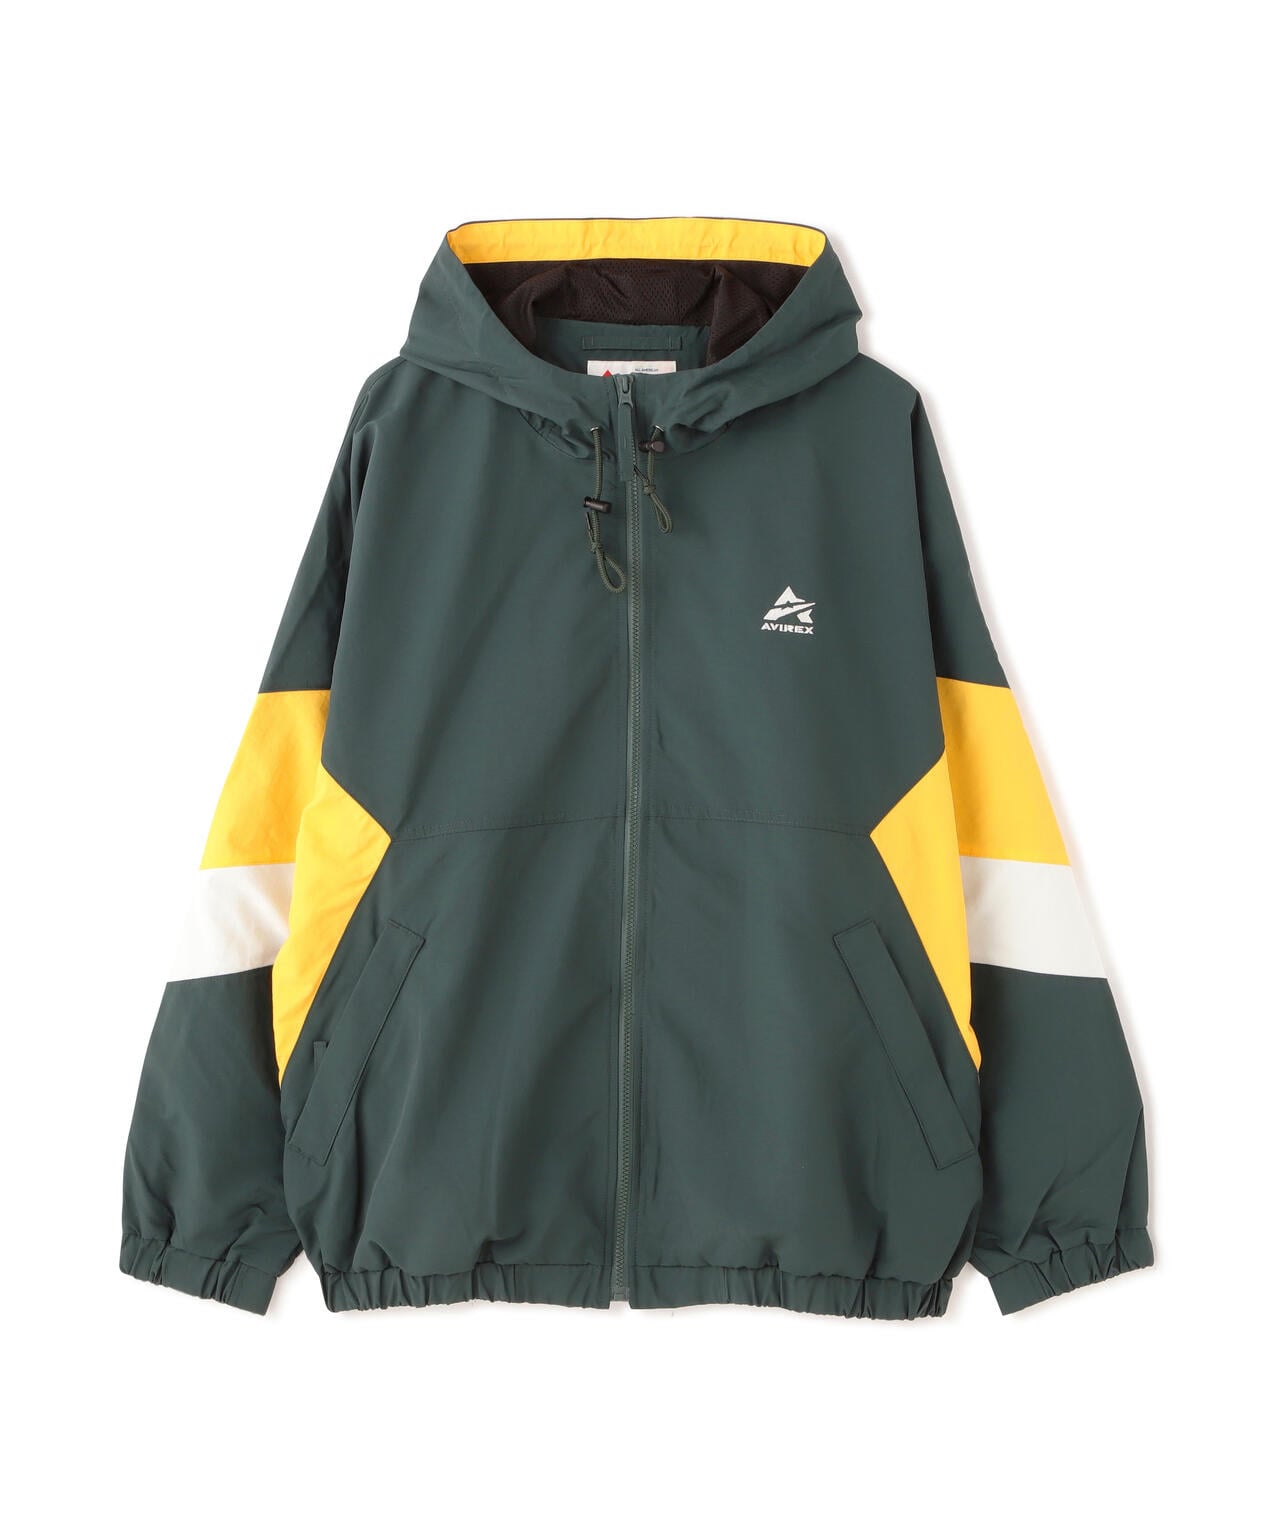 BAGGY FIT HOODED TEAM JACKET / バギーフィット フーディー チーム 